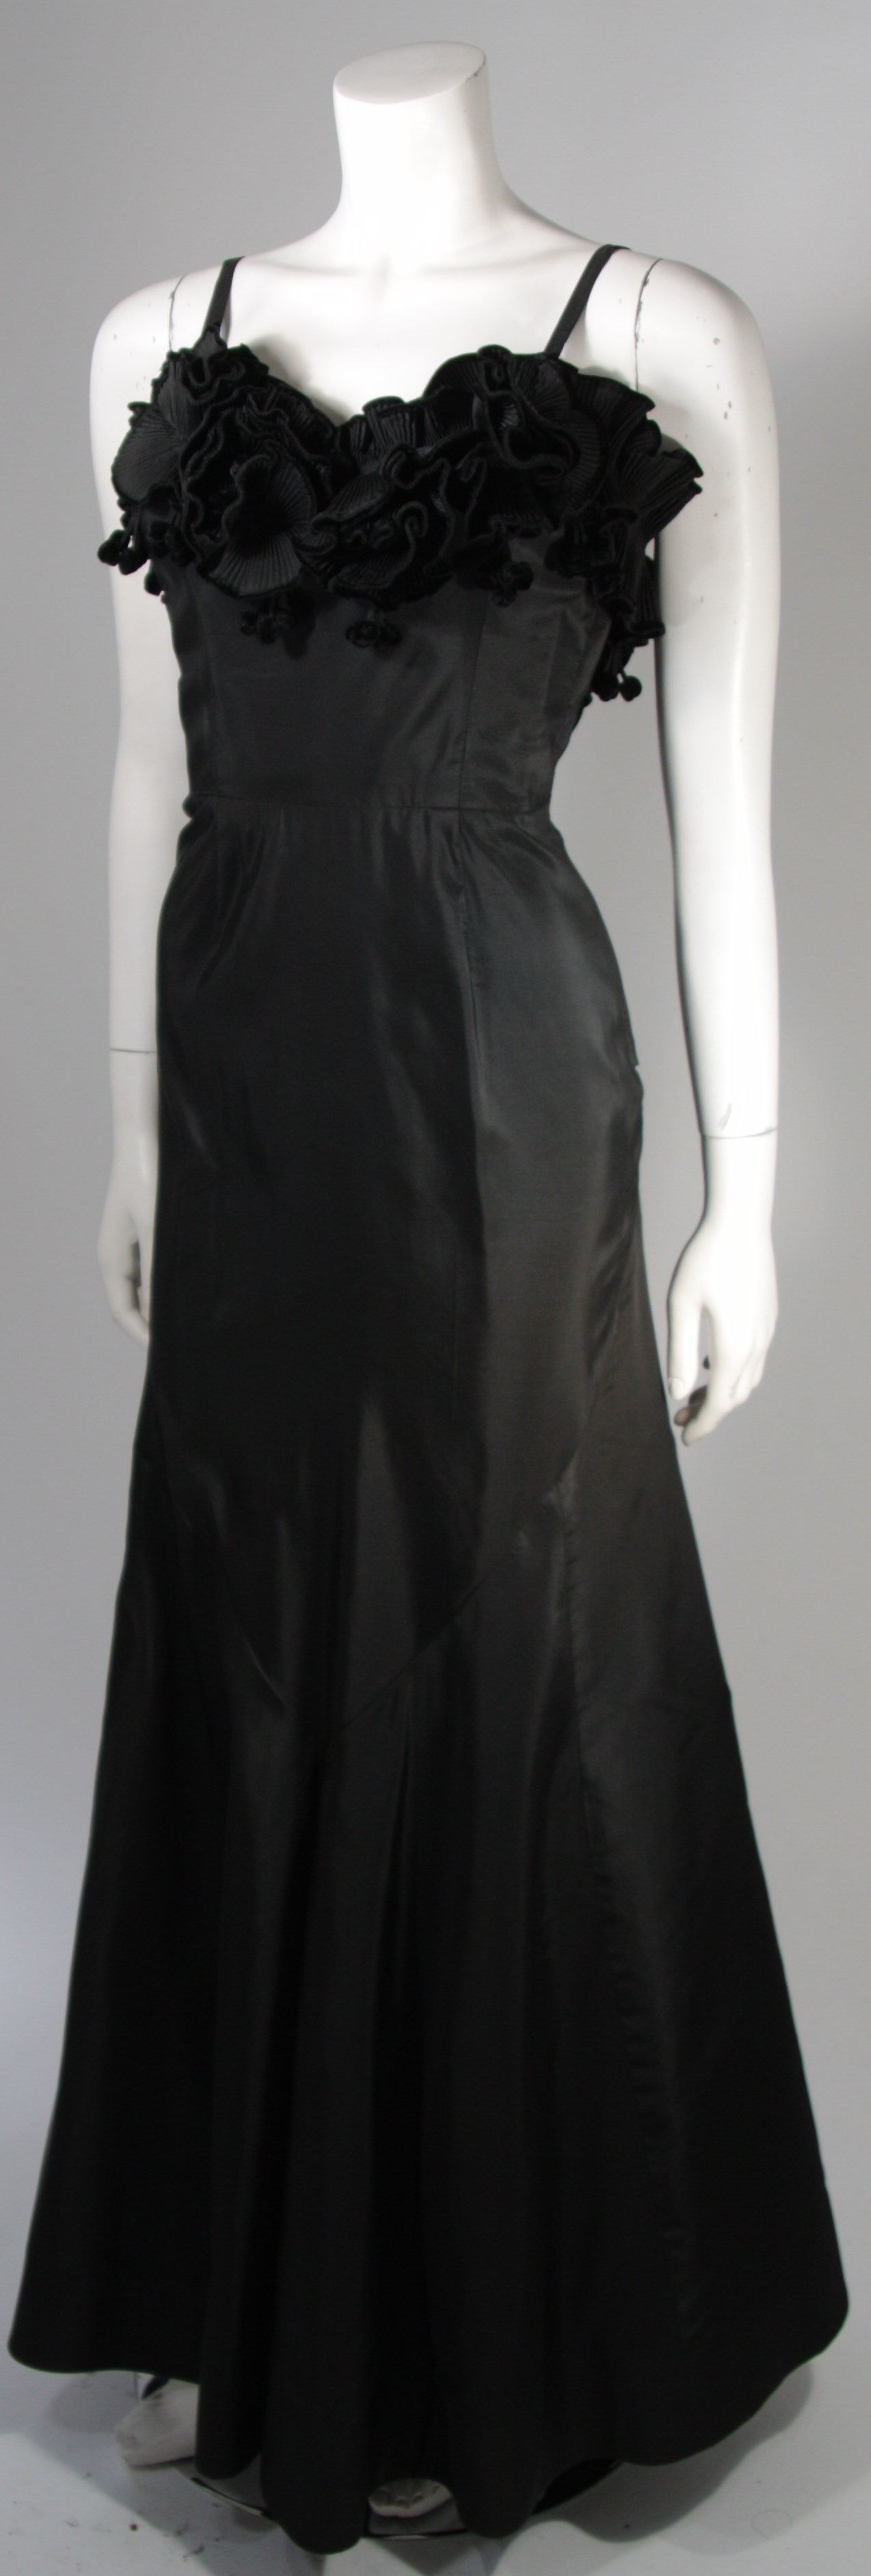 THERESE French Shop, 1950s three dimensional floral bodice gown  in black silk with velvet trim on flowers. 
The own featuring dynamic pleated floral detail at the bust. The skirt has a fitted silhouette with a trumpet flare with a full godet center